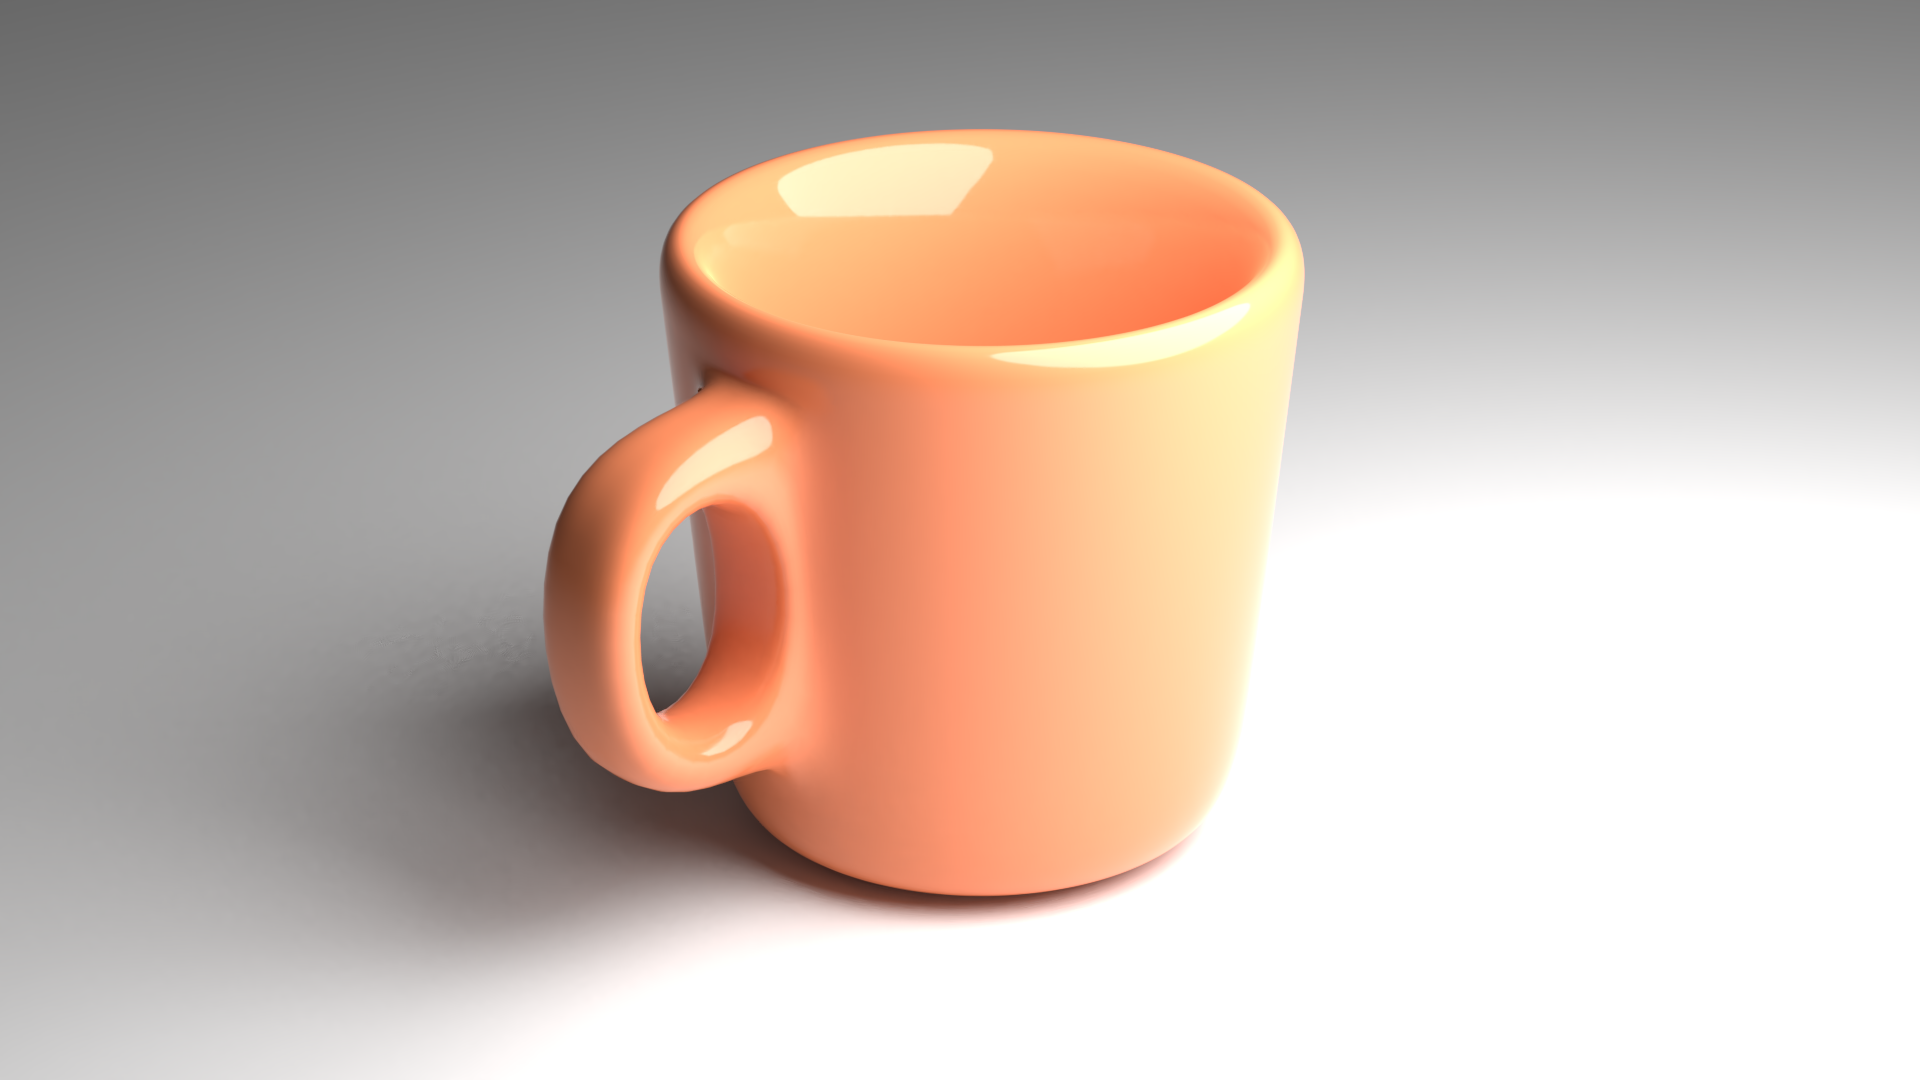 A picture of a cup.